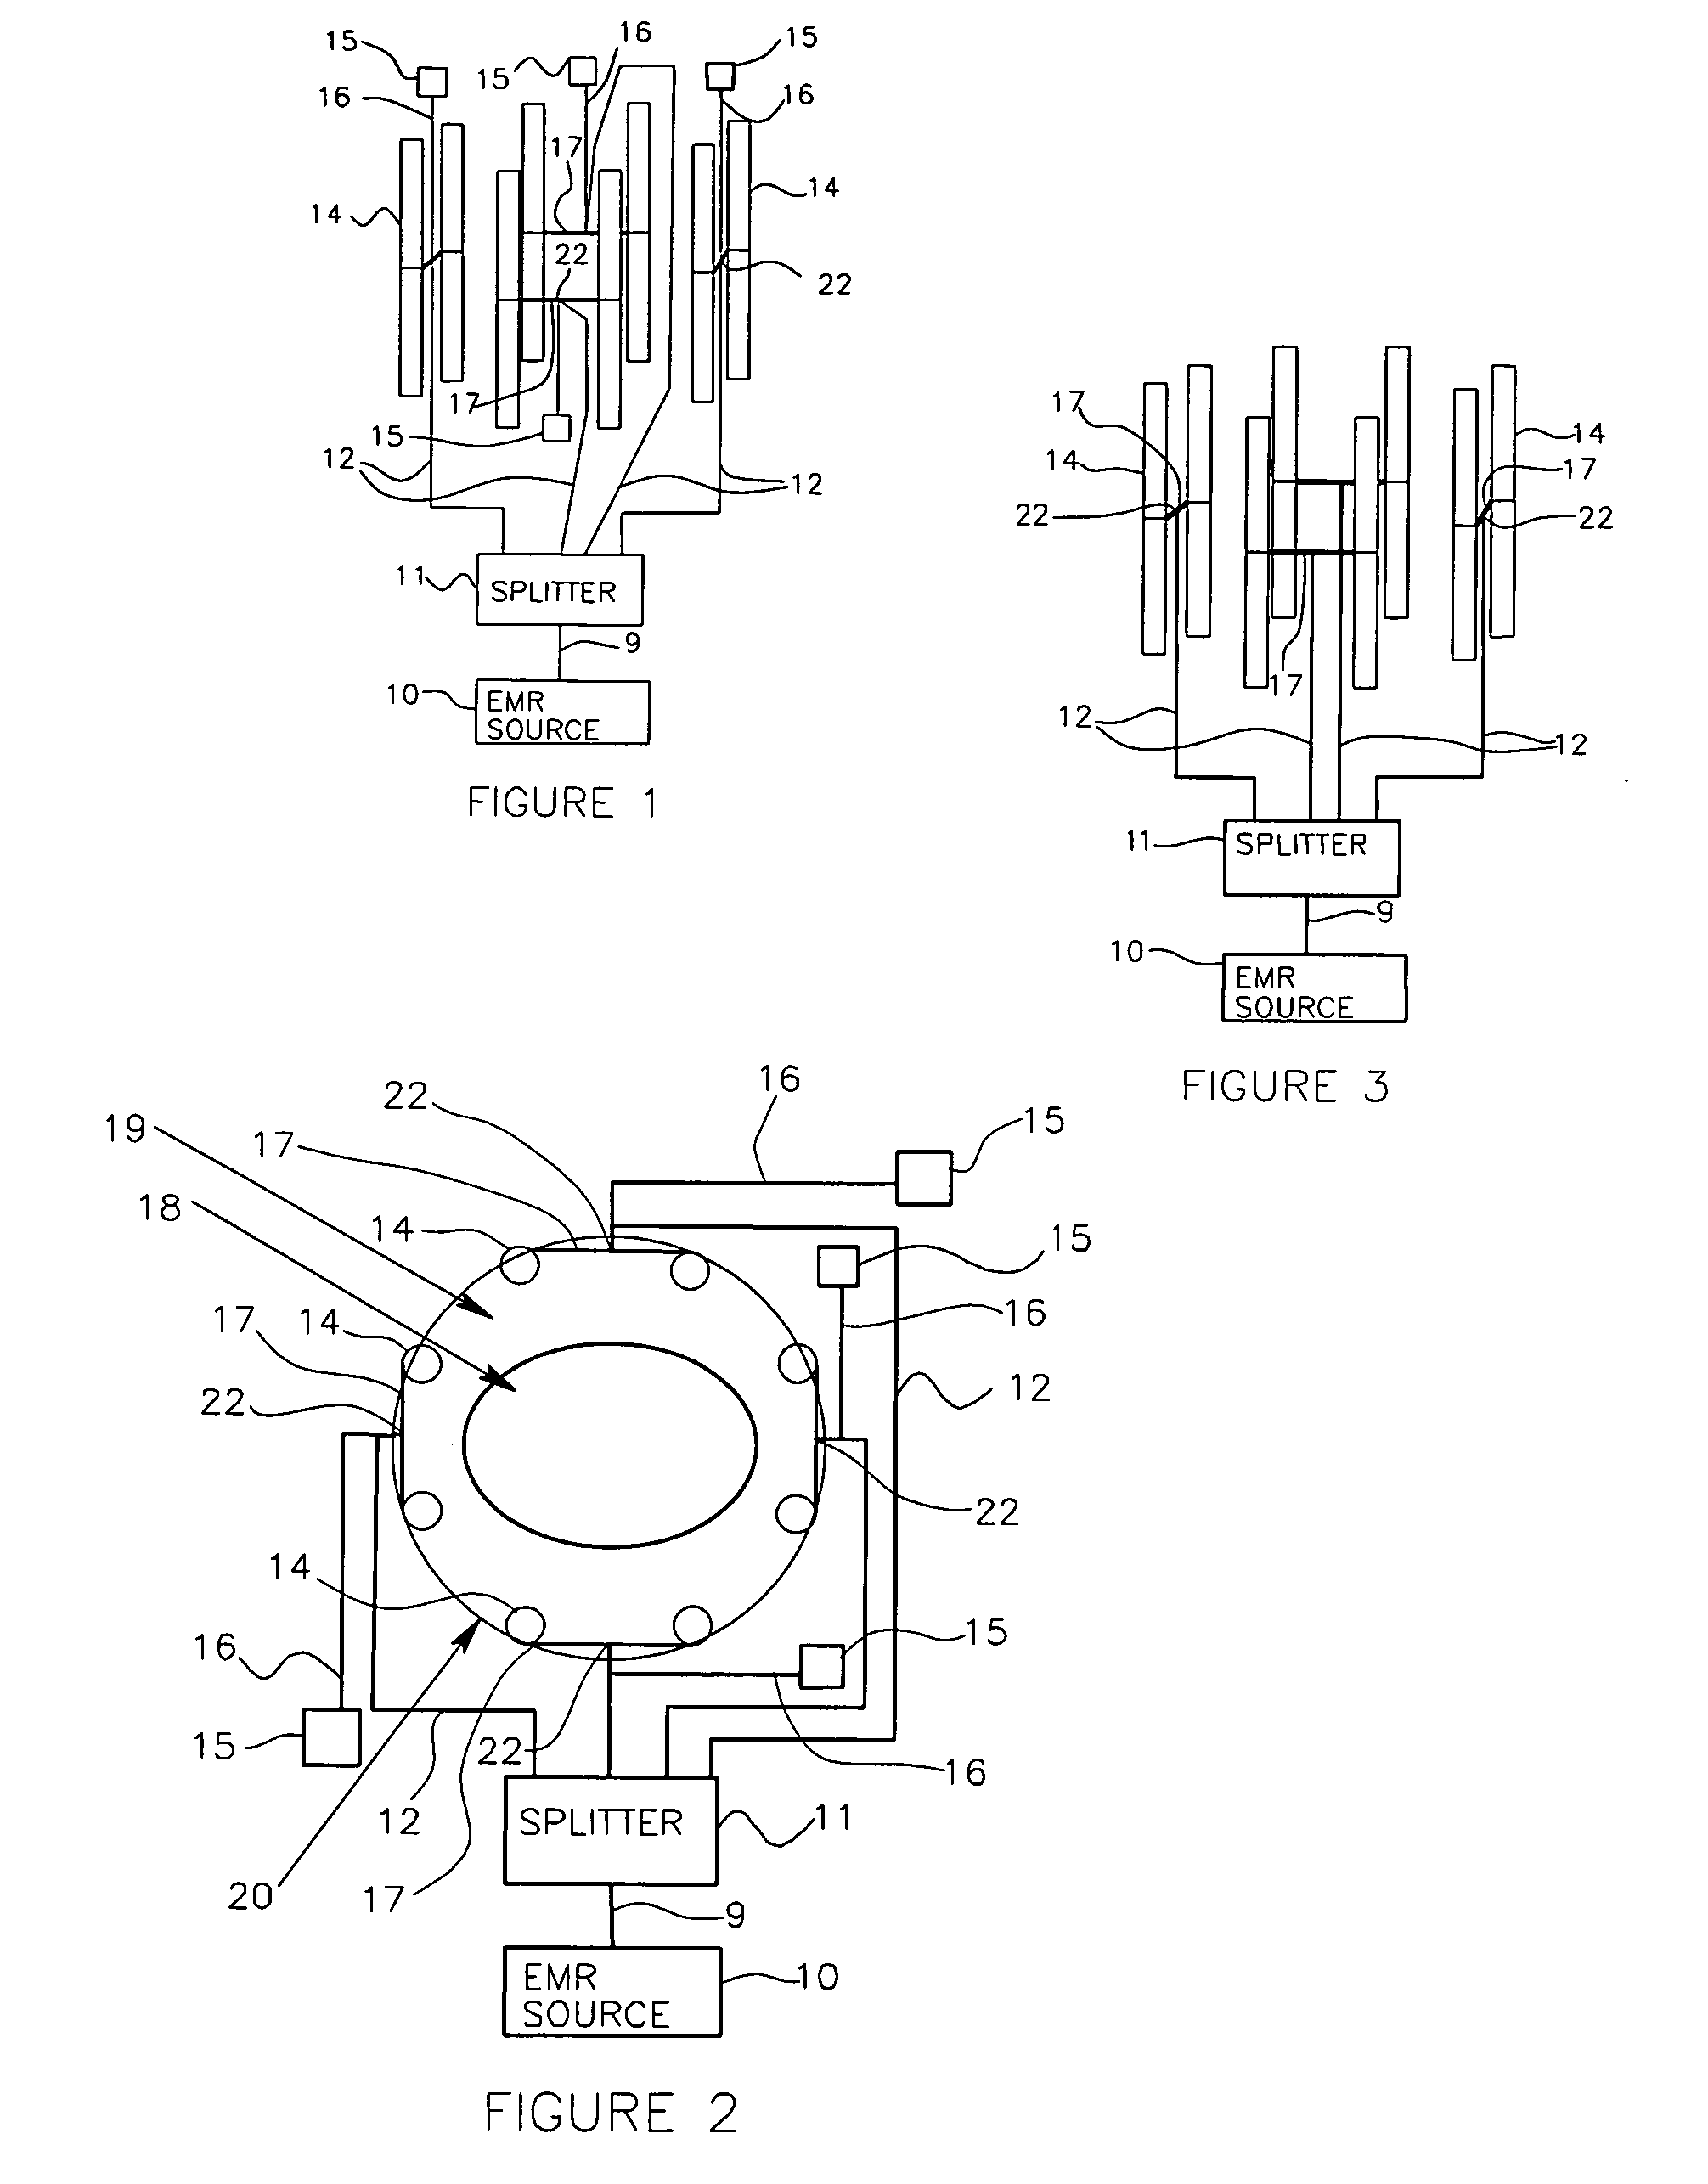 System and method for irradiating a target with electromagnetic radiation to produce a heated region